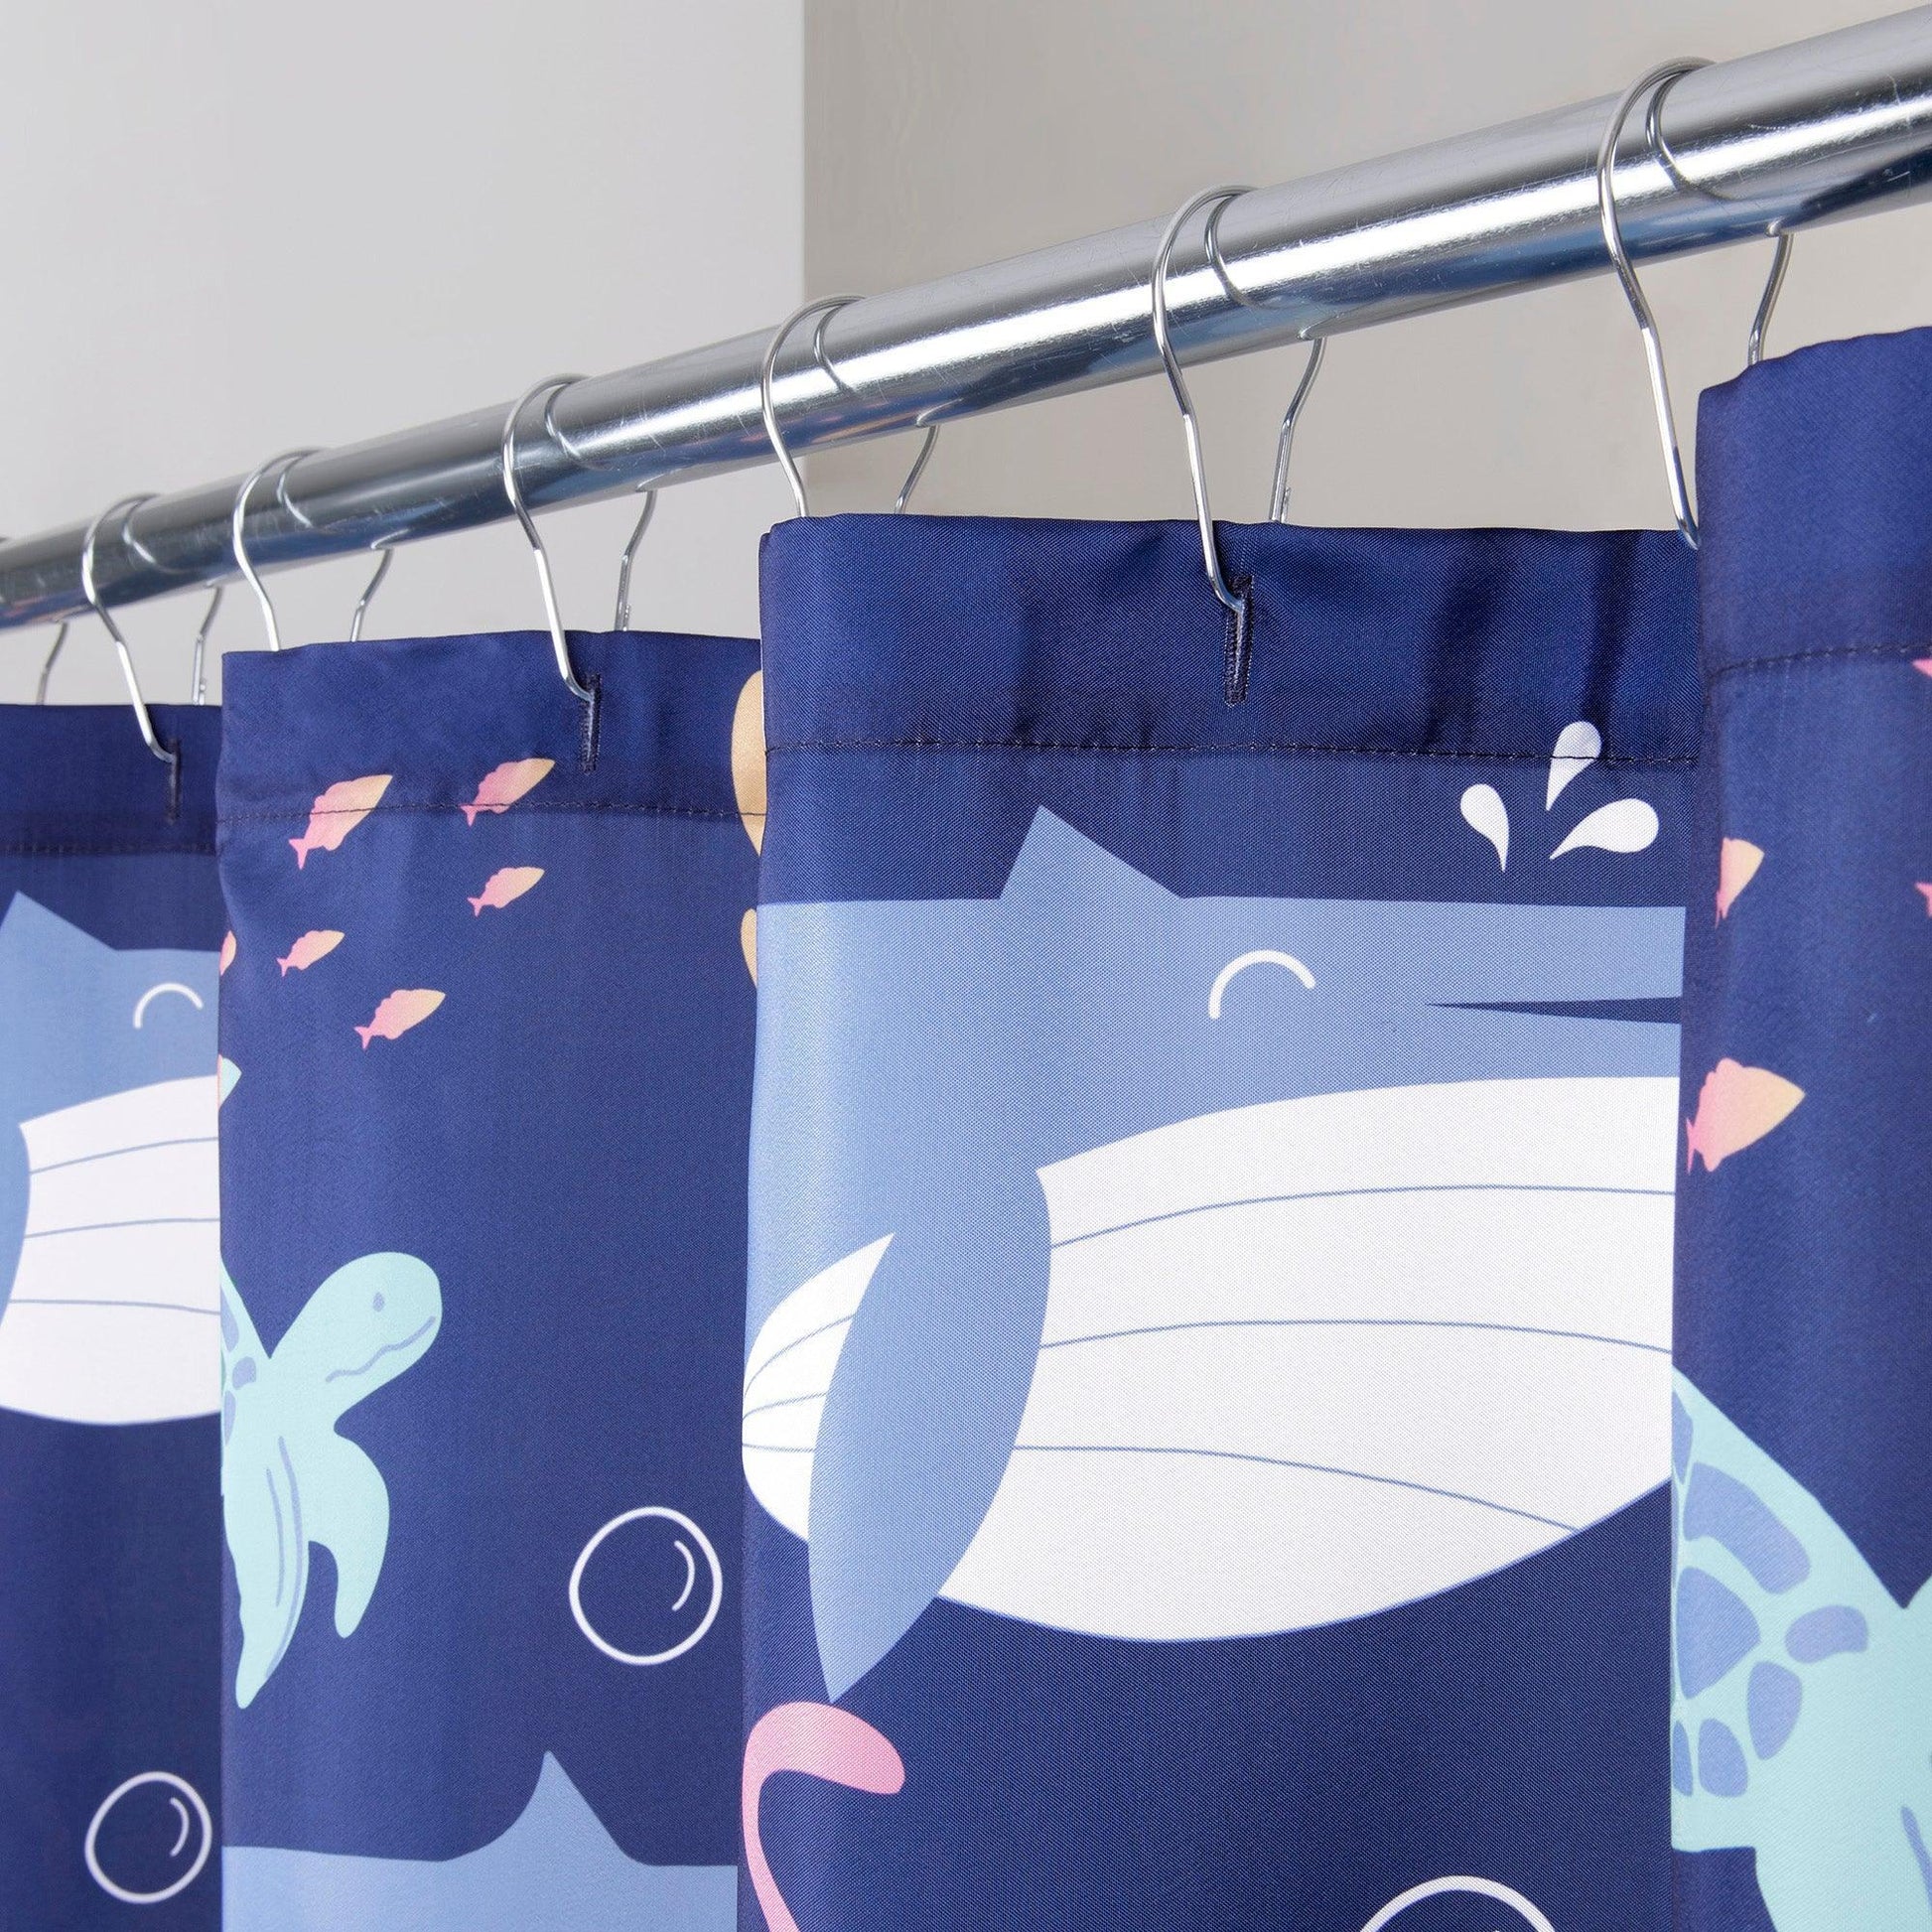 Whales Shower Curtain - Allure Home Creation